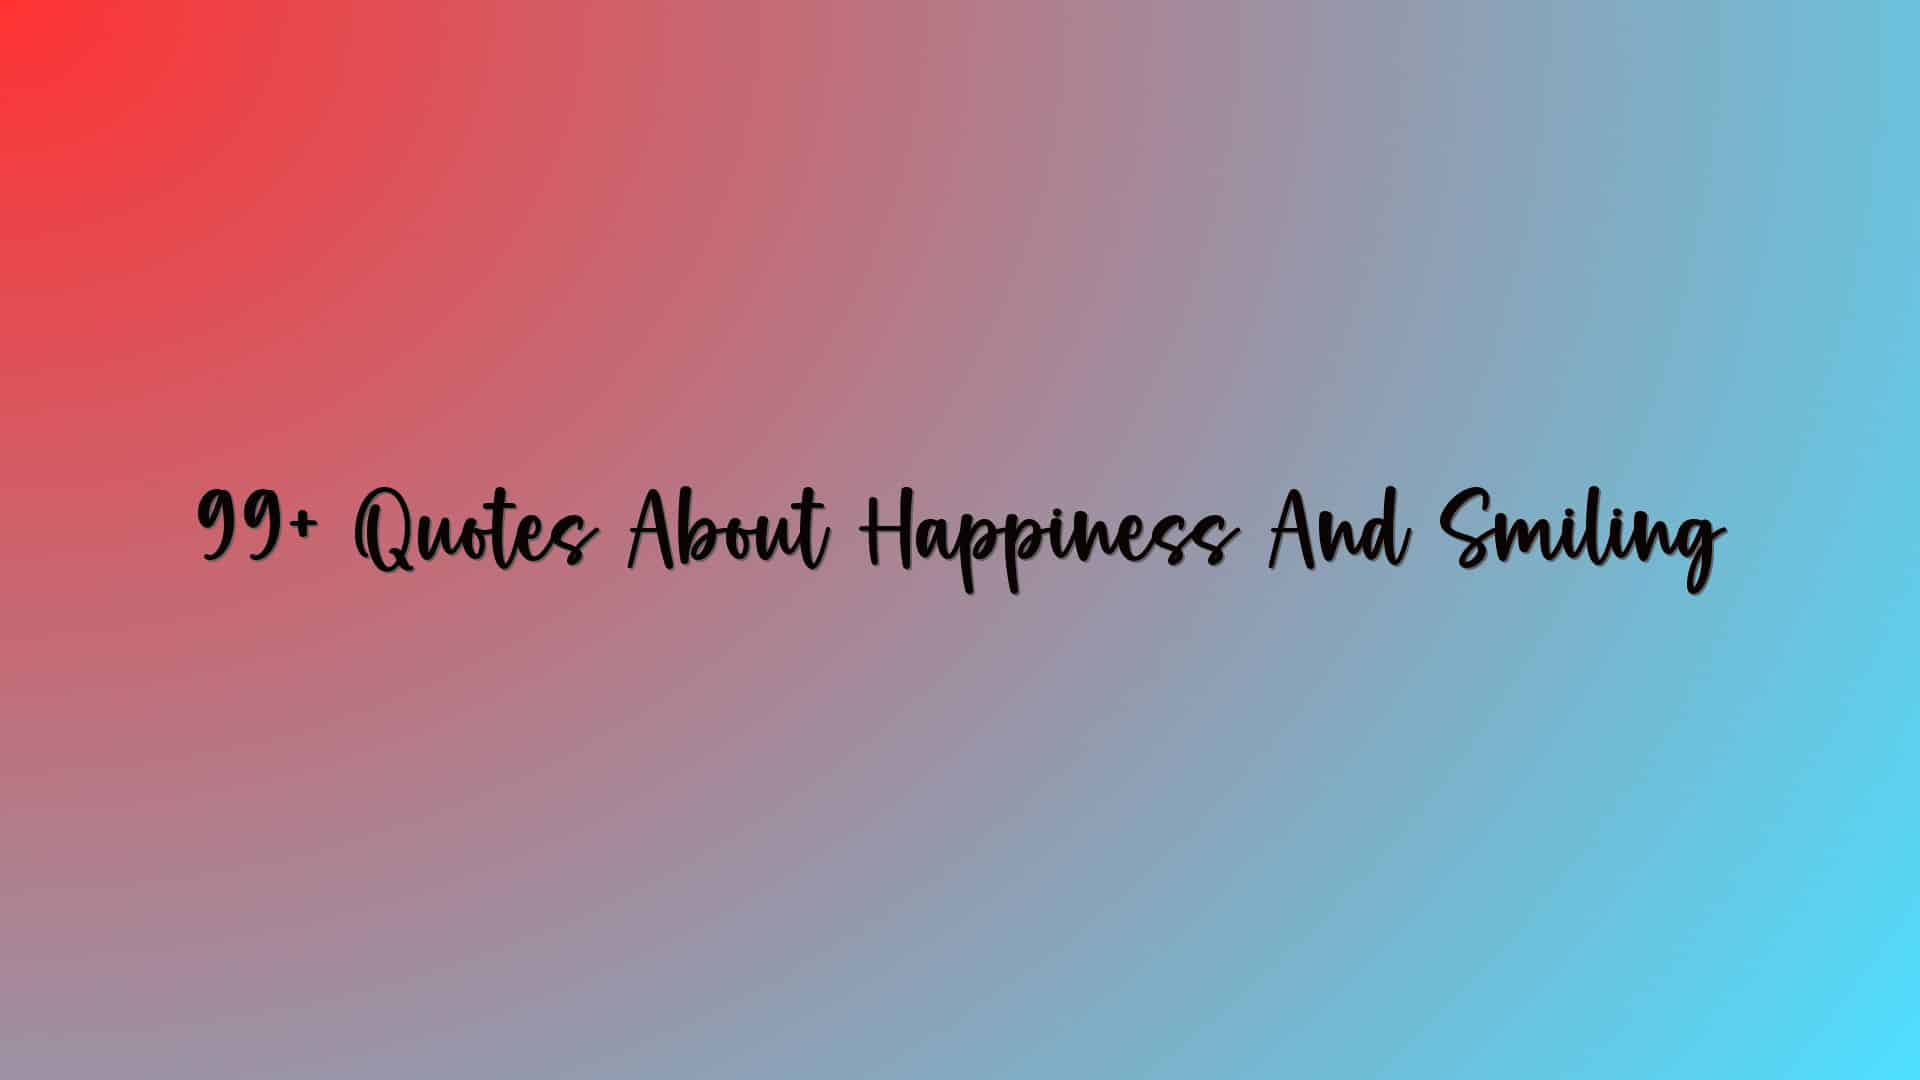 99+ Quotes About Happiness And Smiling